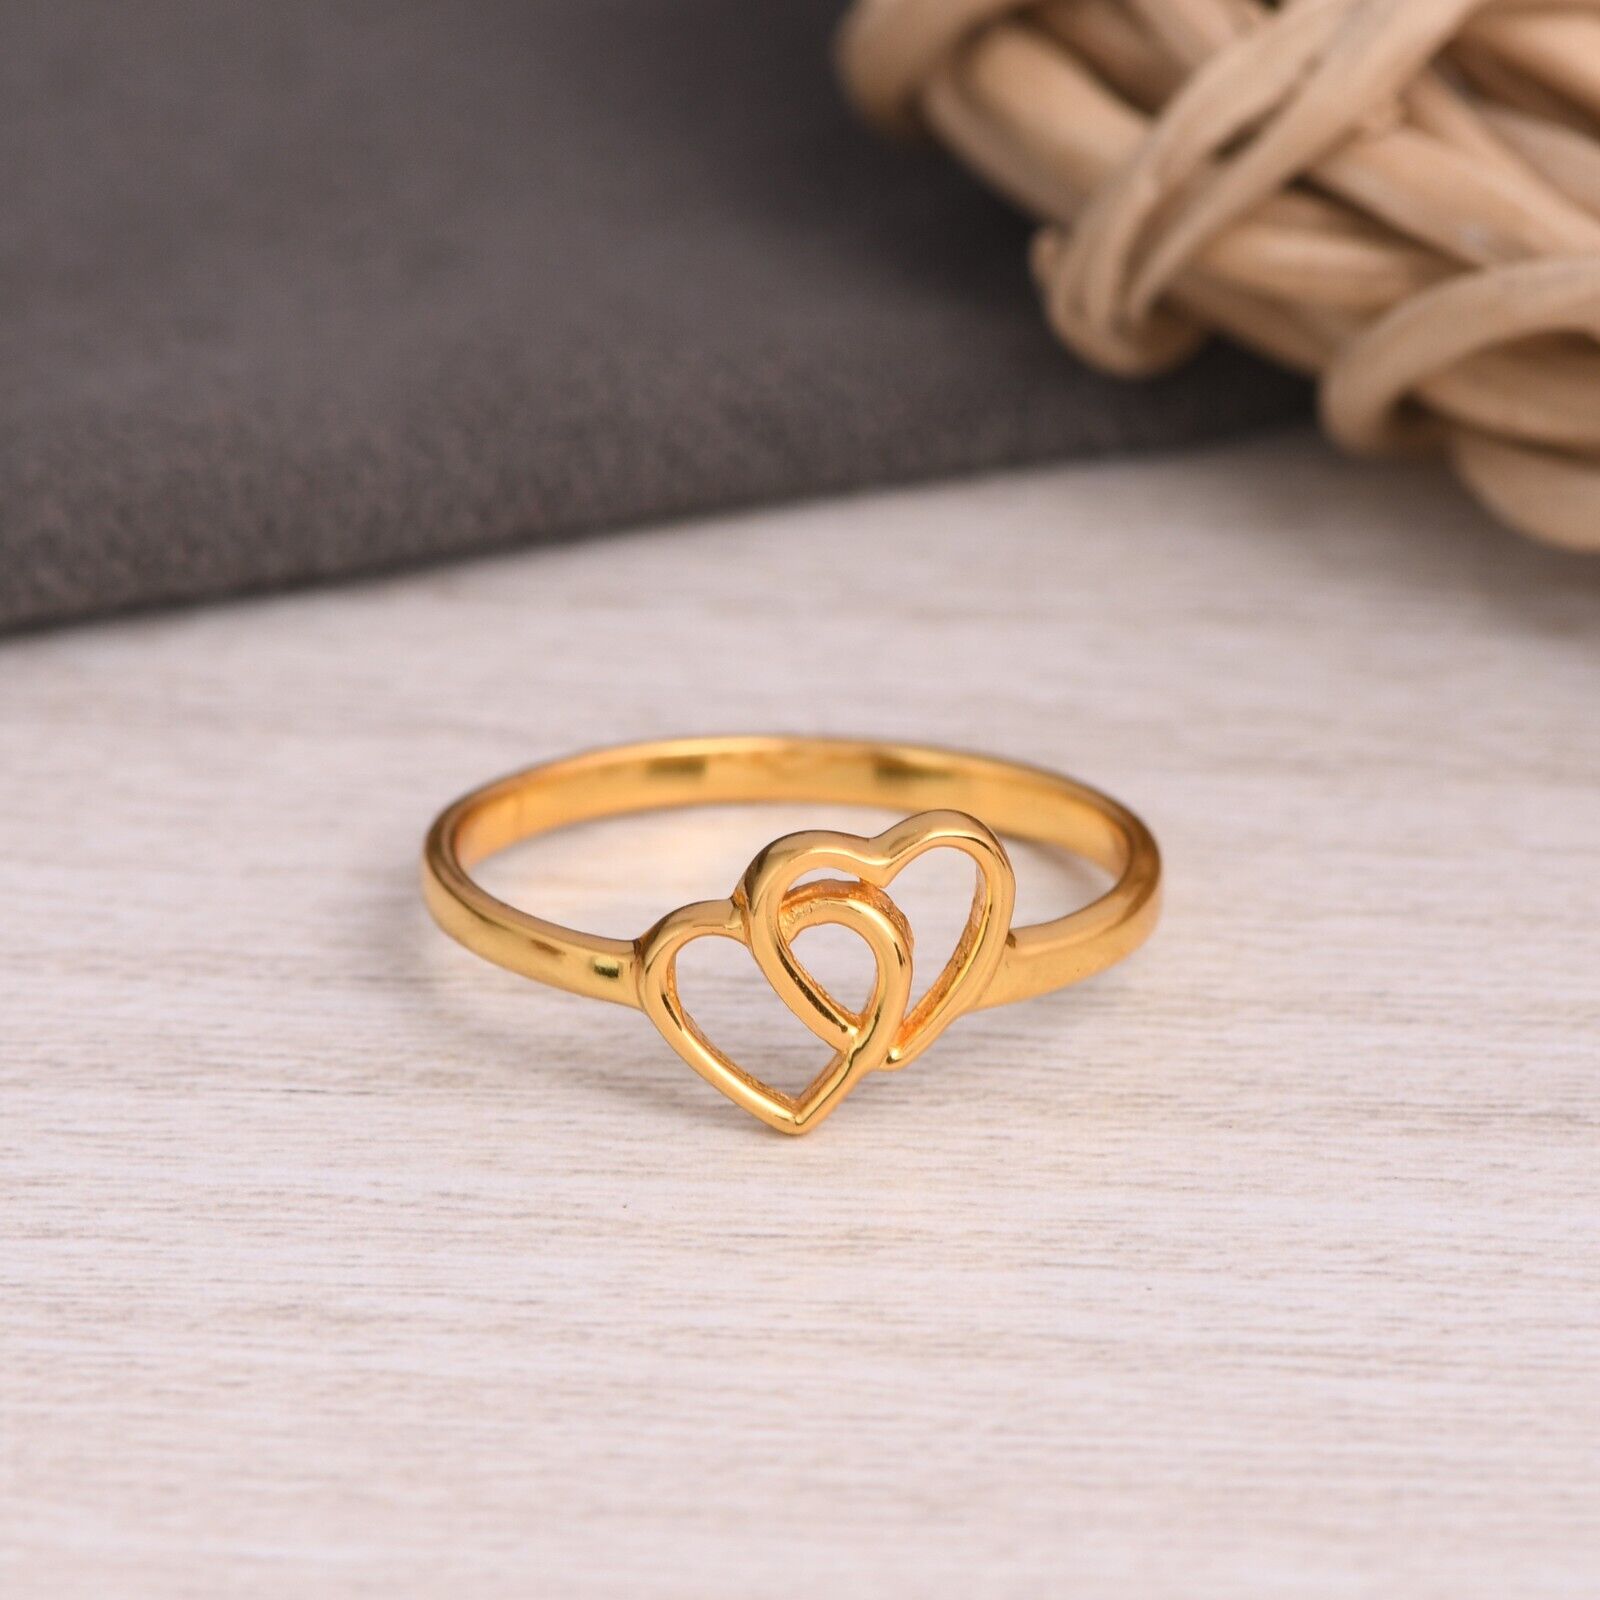 formule single Nest 14k Pure Gold Entwined Ring, Love Double Connected Heart Engagement Ring |  eBay